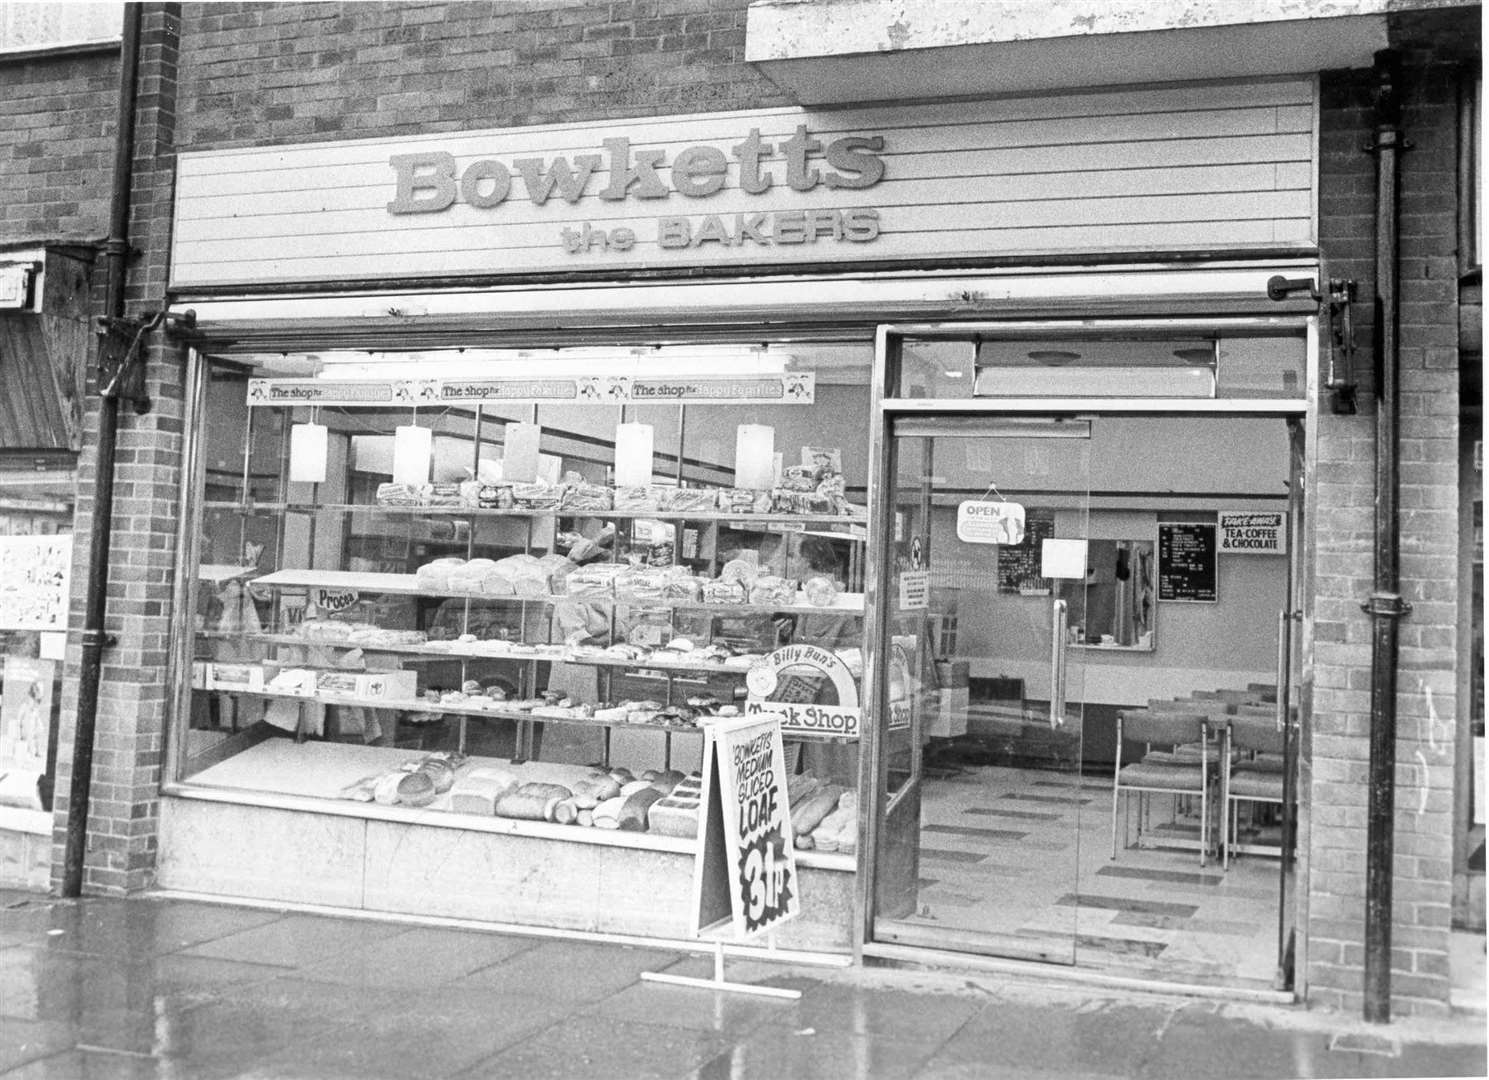 Bowketts bakery shop at Twydall, Gillingham, in August 1985